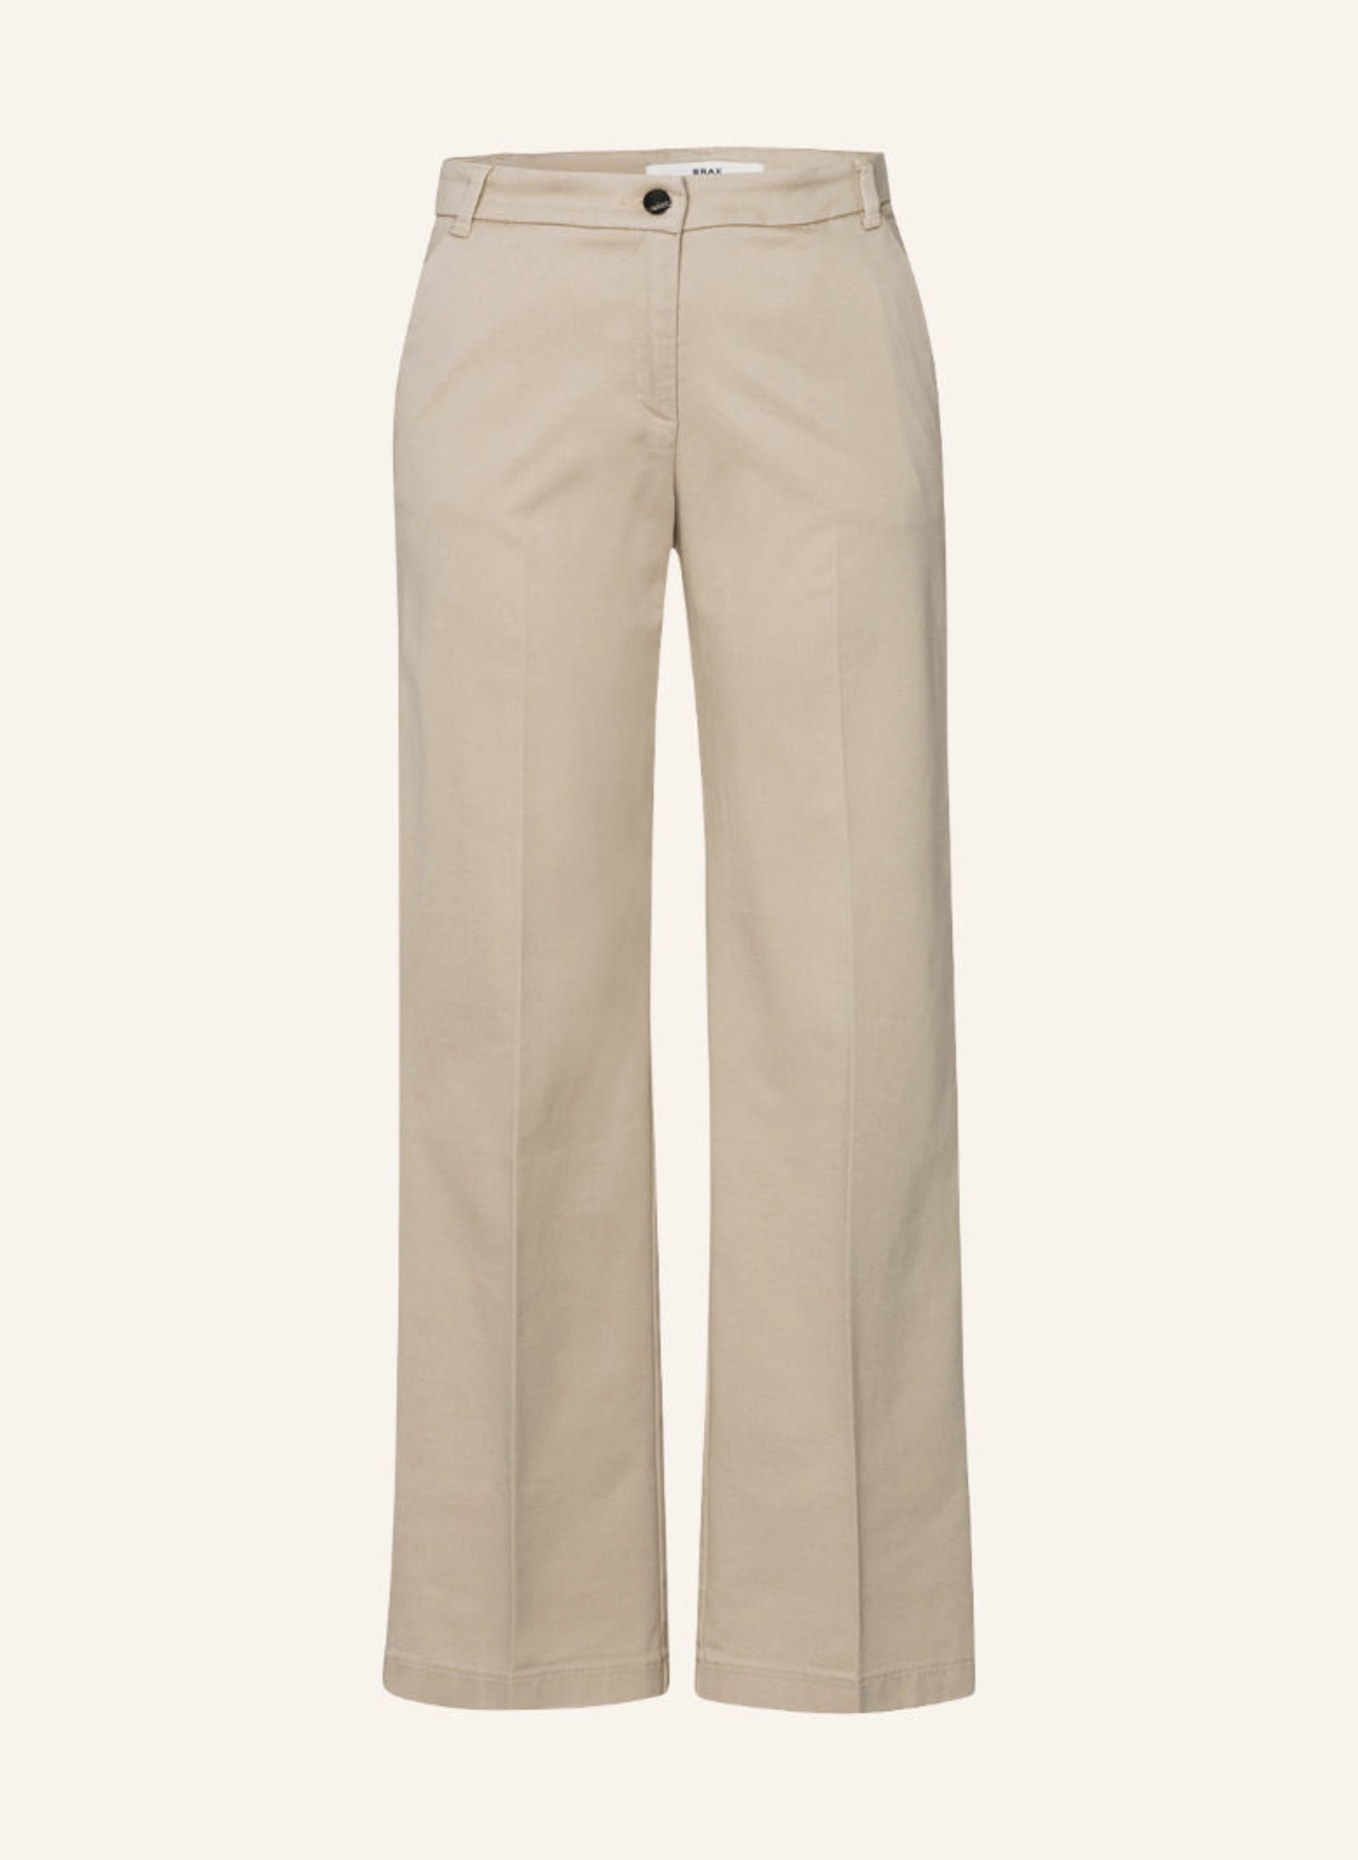 STYLE Palazzohose beige BRAX in MAINE